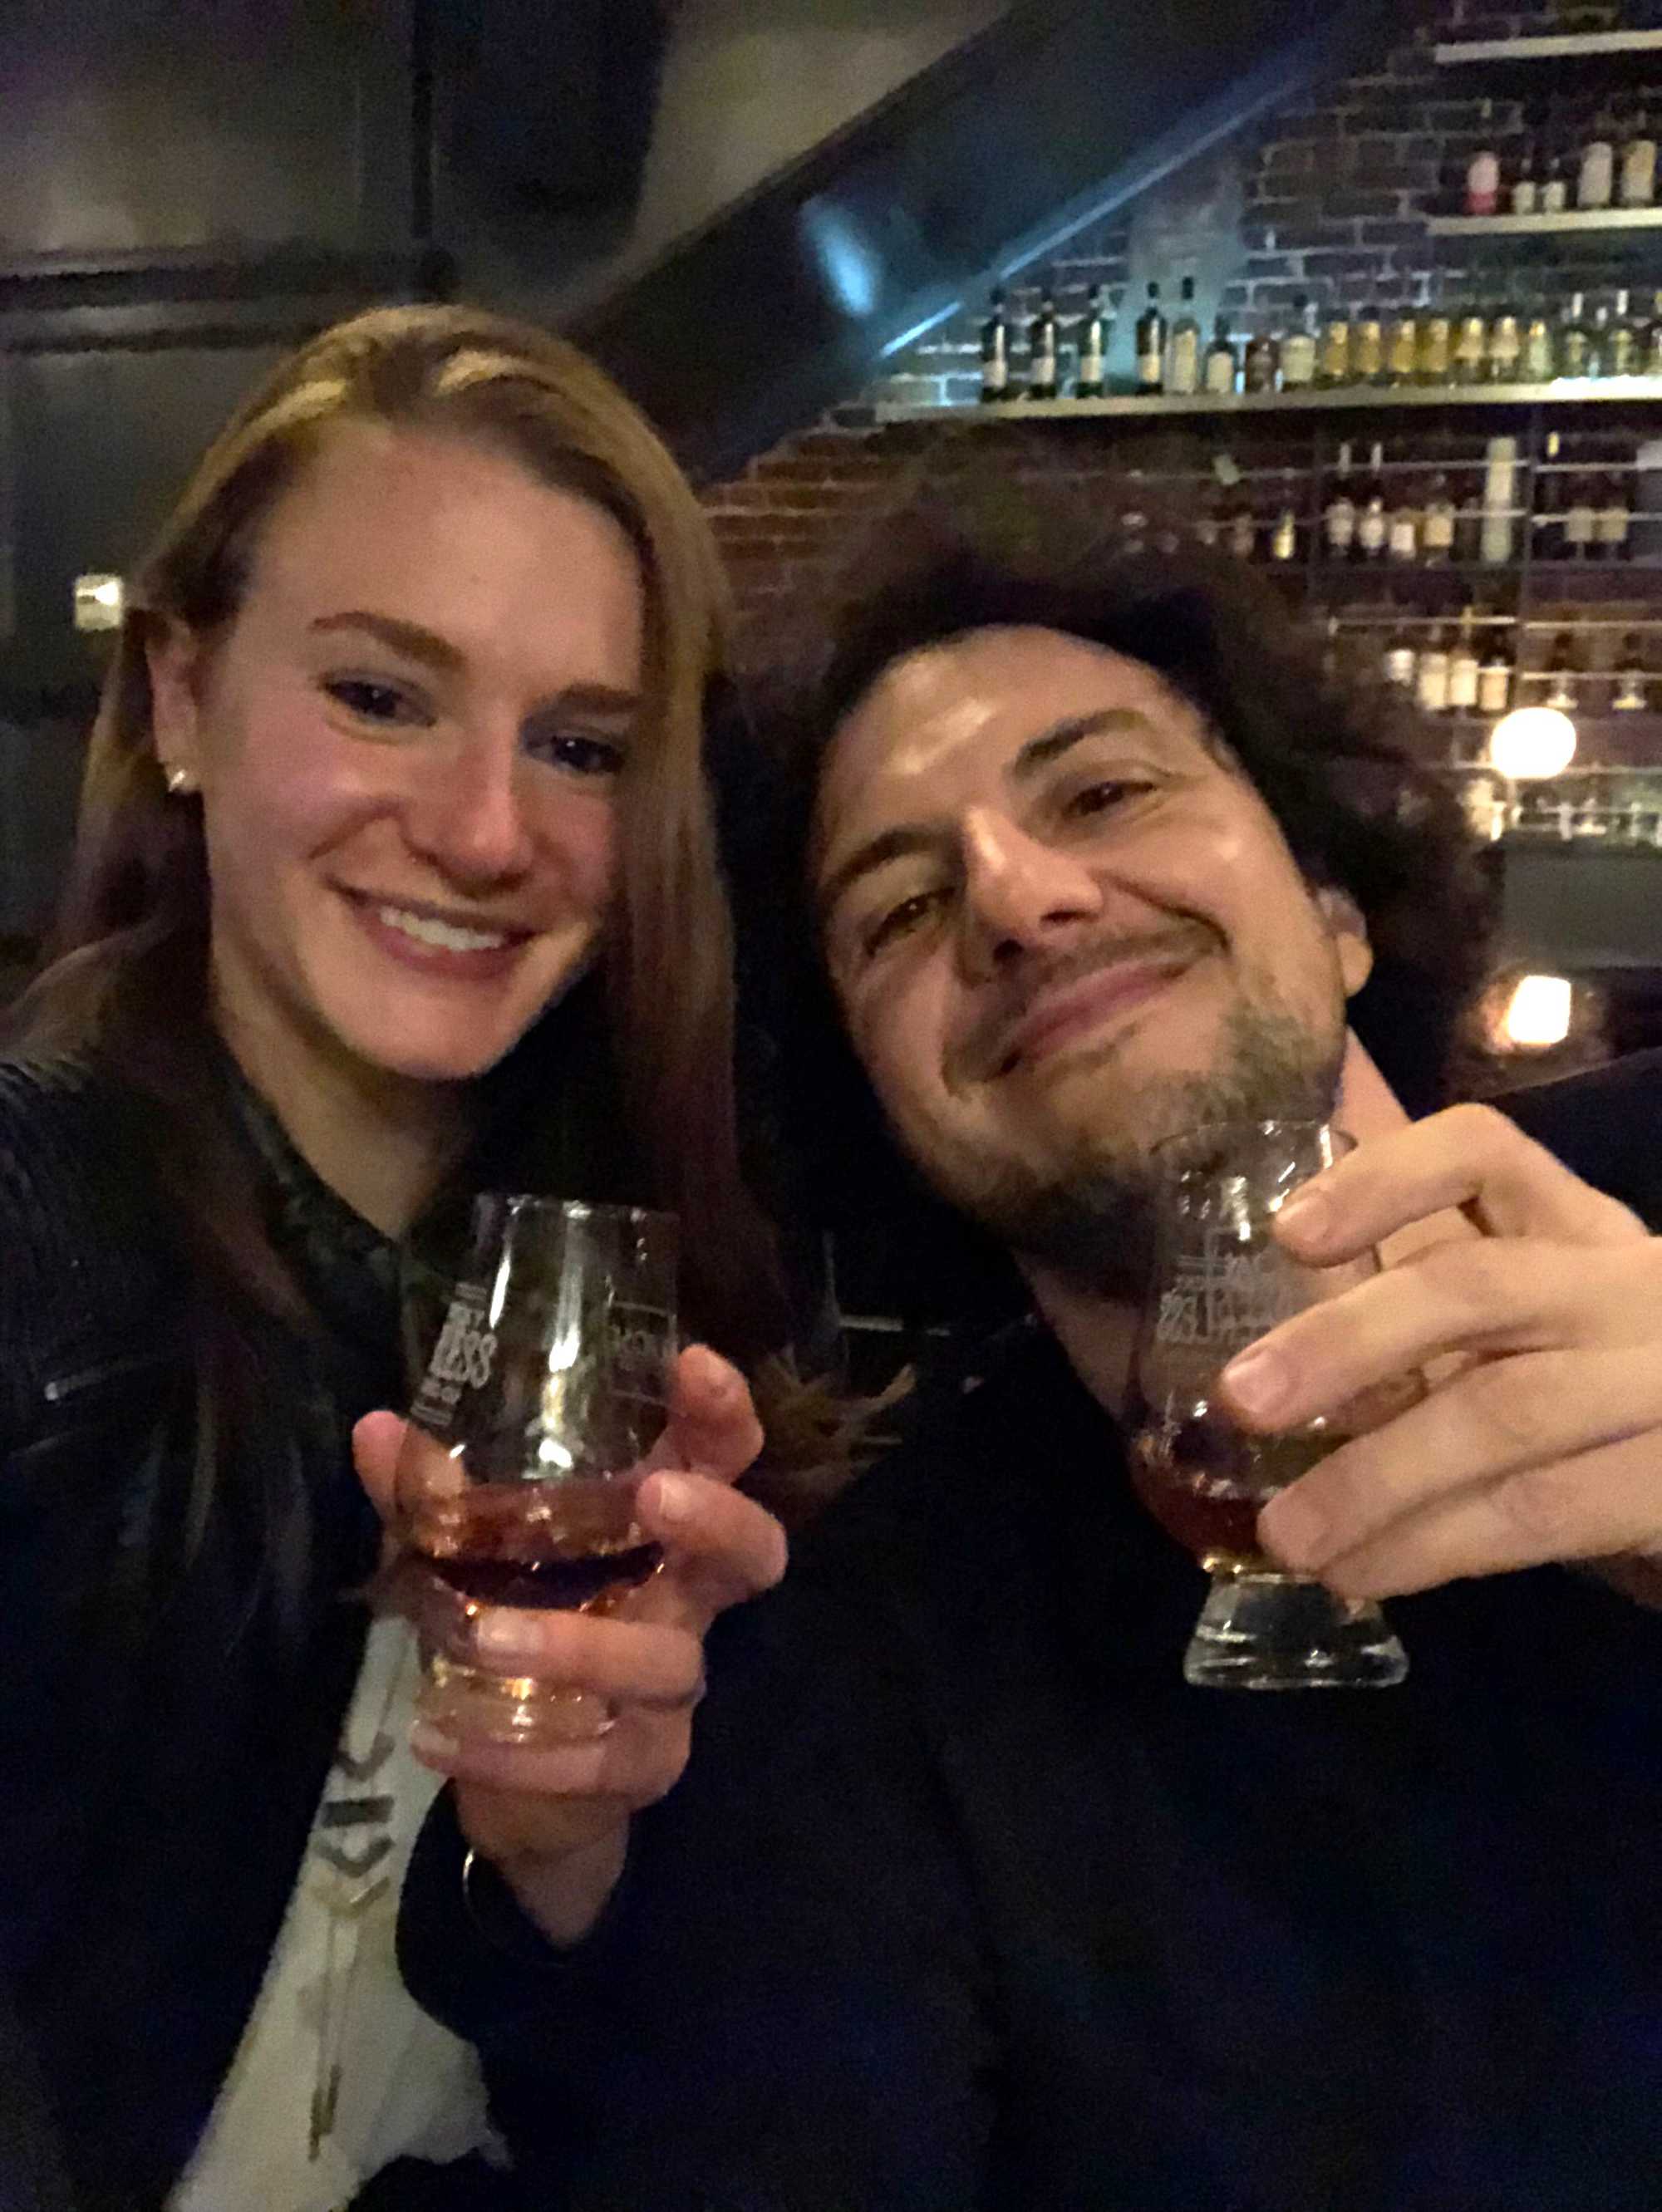 Kristin Knouse and David Sabatini at the Jack Rose Dining Saloon in Washington D.C., on April 18, 2018, a fateful night in their complex relationship.

